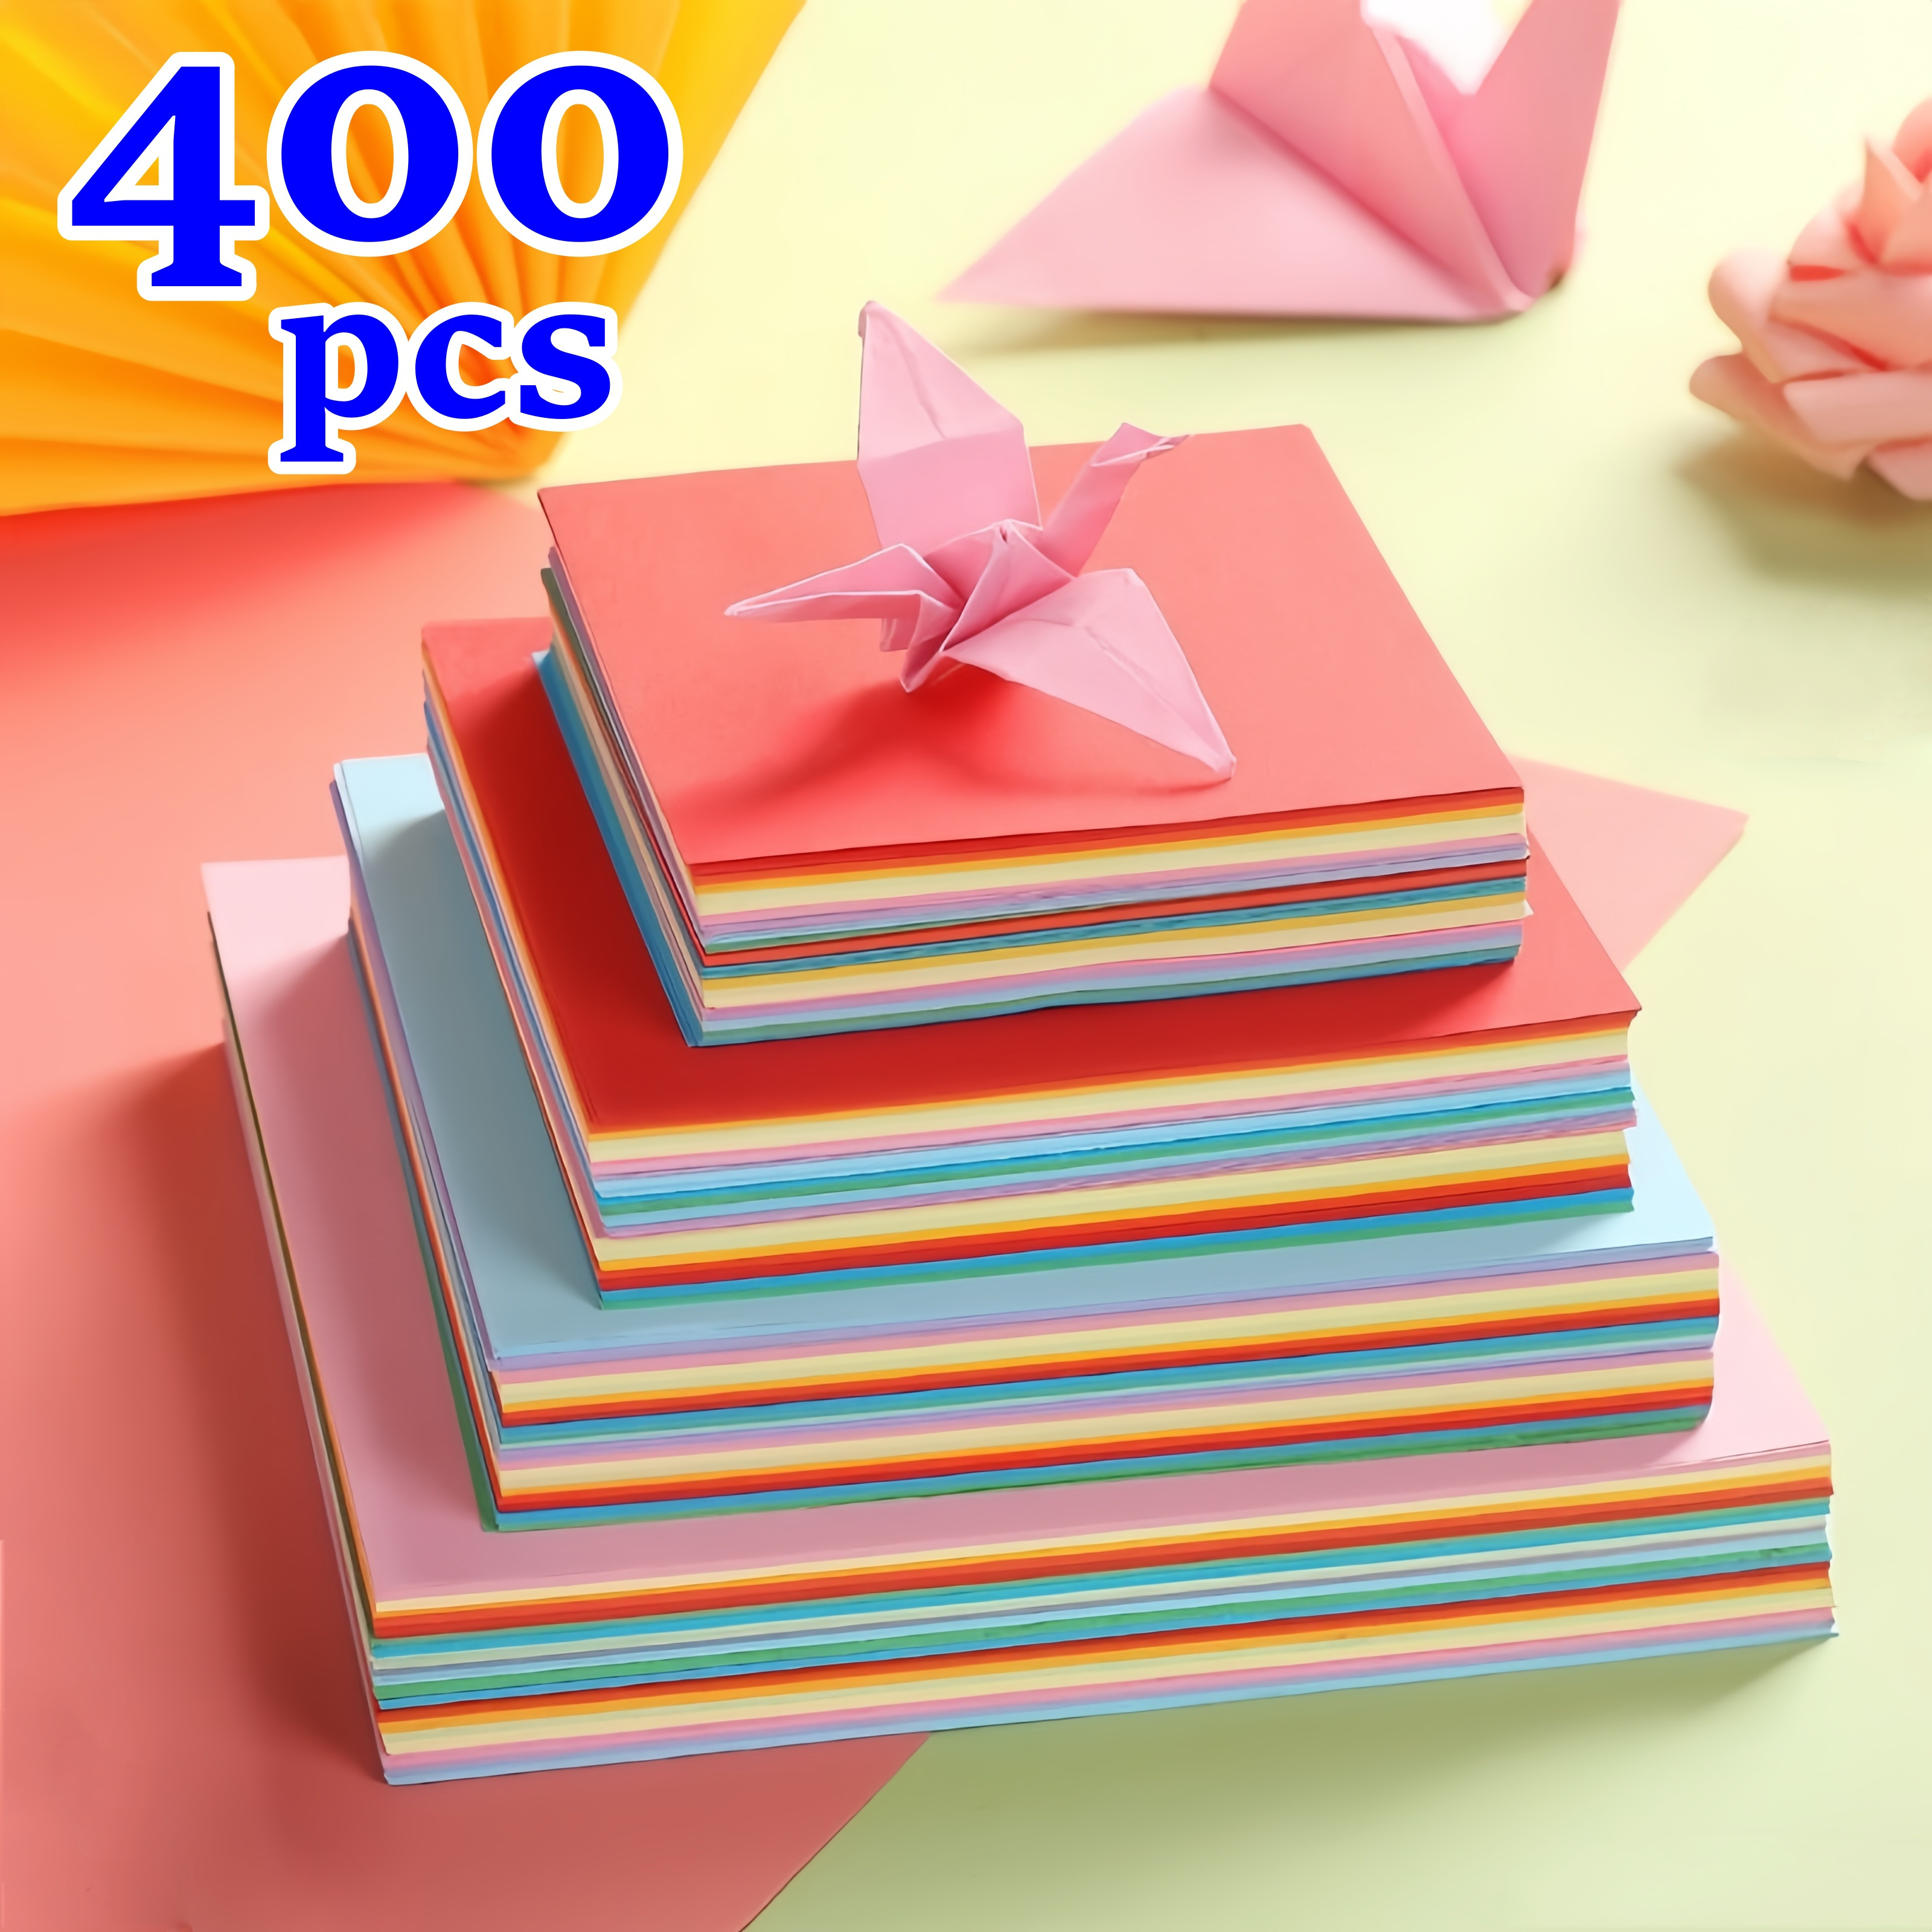 

400pcs Origami Set 4 Different Sizes Colorful Origami Handmade Origami Paper Cutting Paper Copy Paper Printing Paper 10 Random Colorful Creative Diy Pure Color Paper